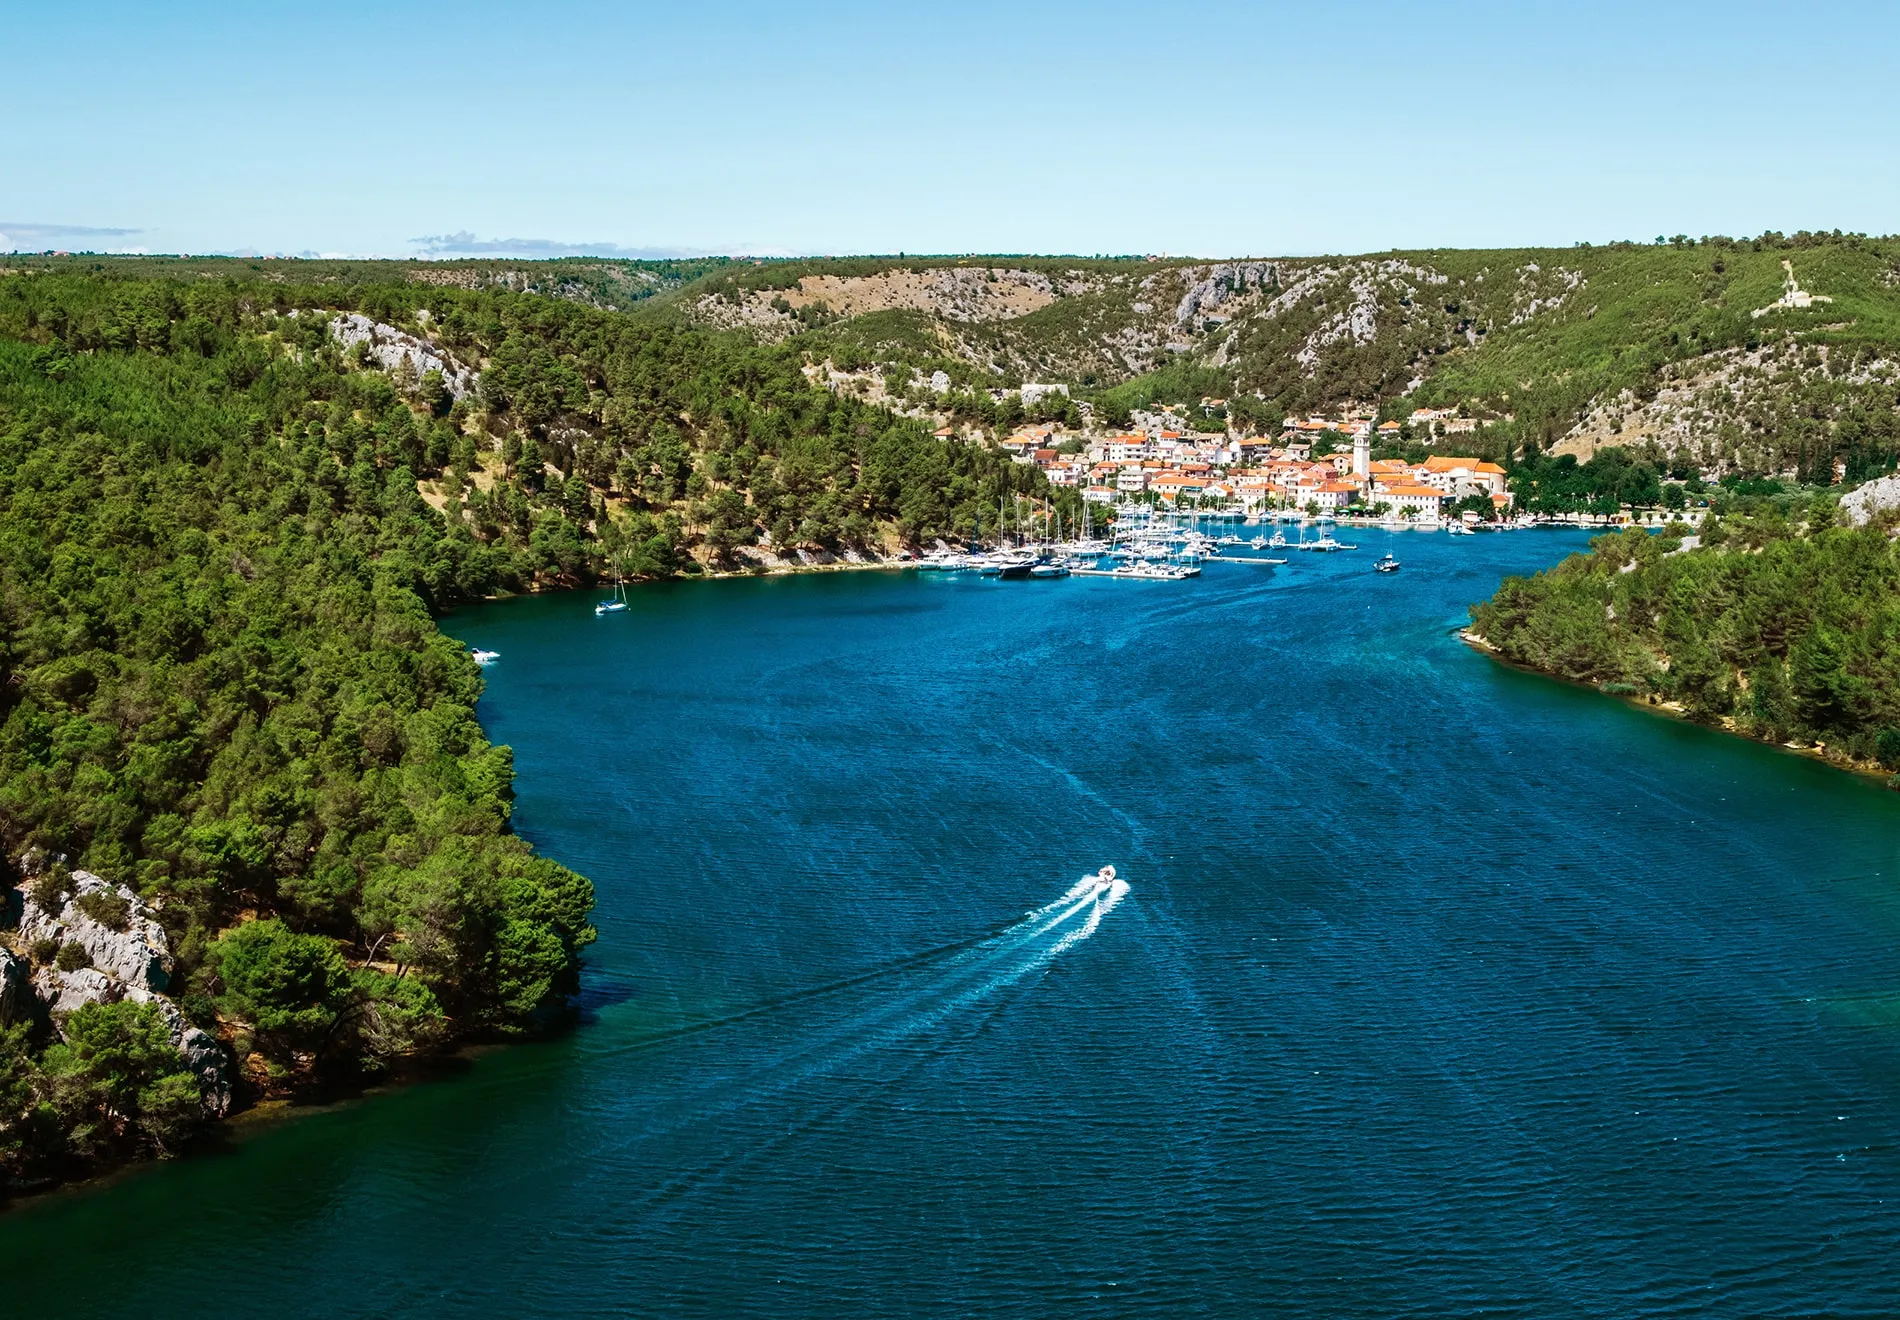 What are some standout itineraries you recommend for Croatia